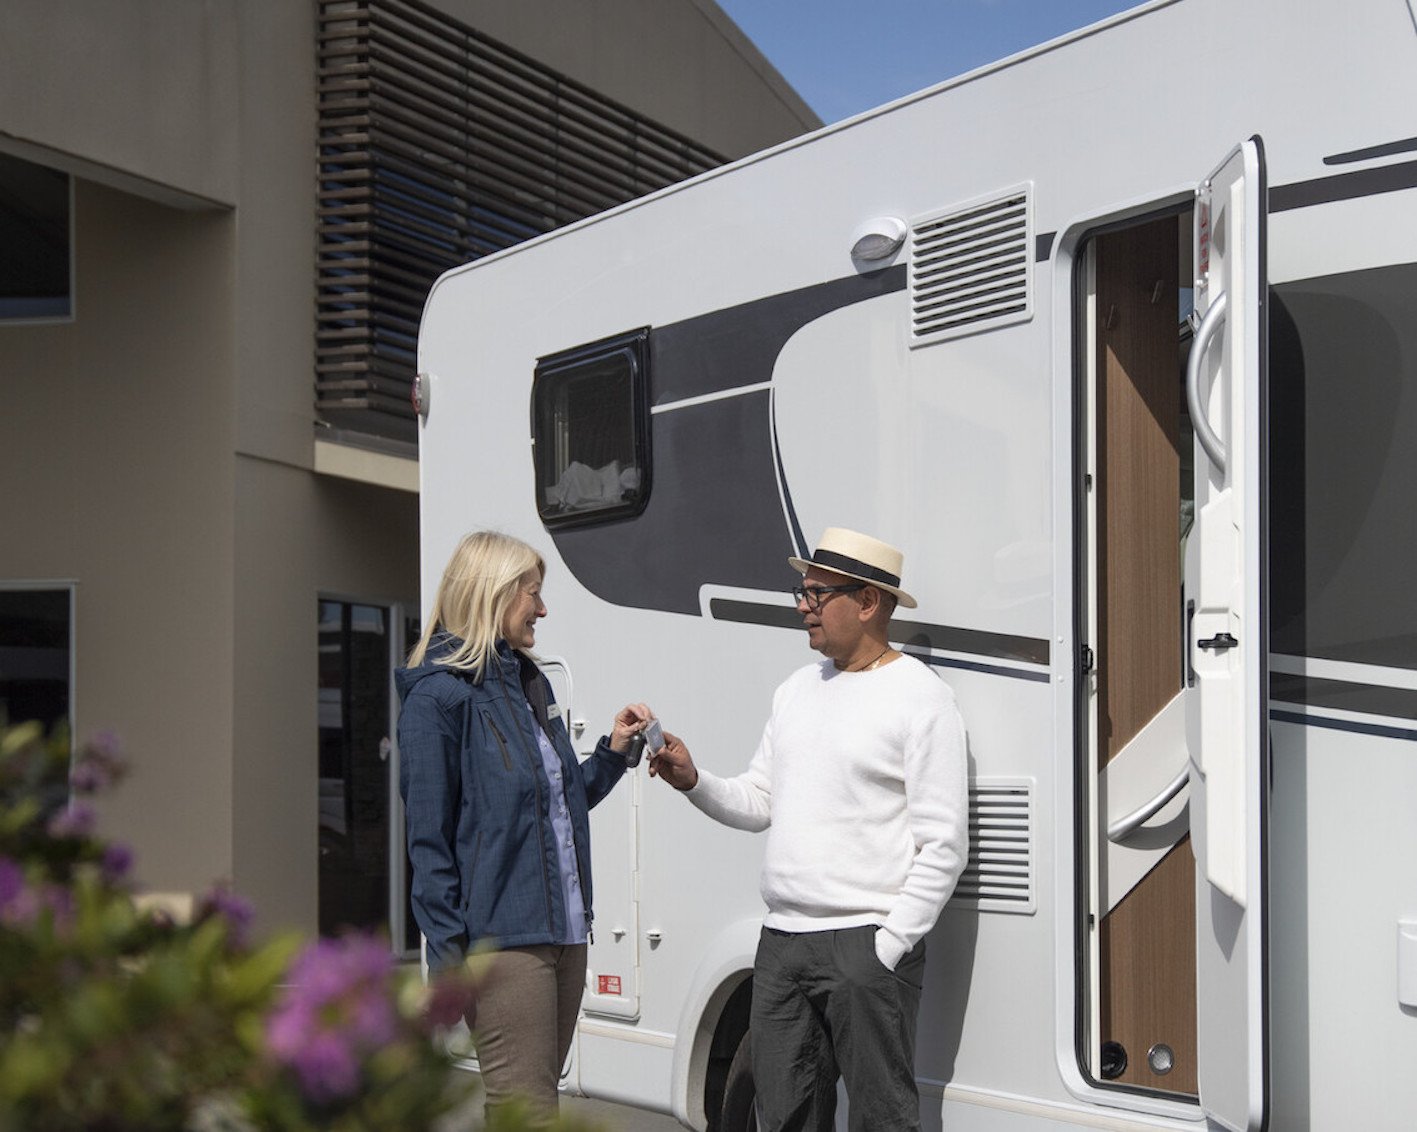 Handing over a motorhome to a guest at the Wilderness base